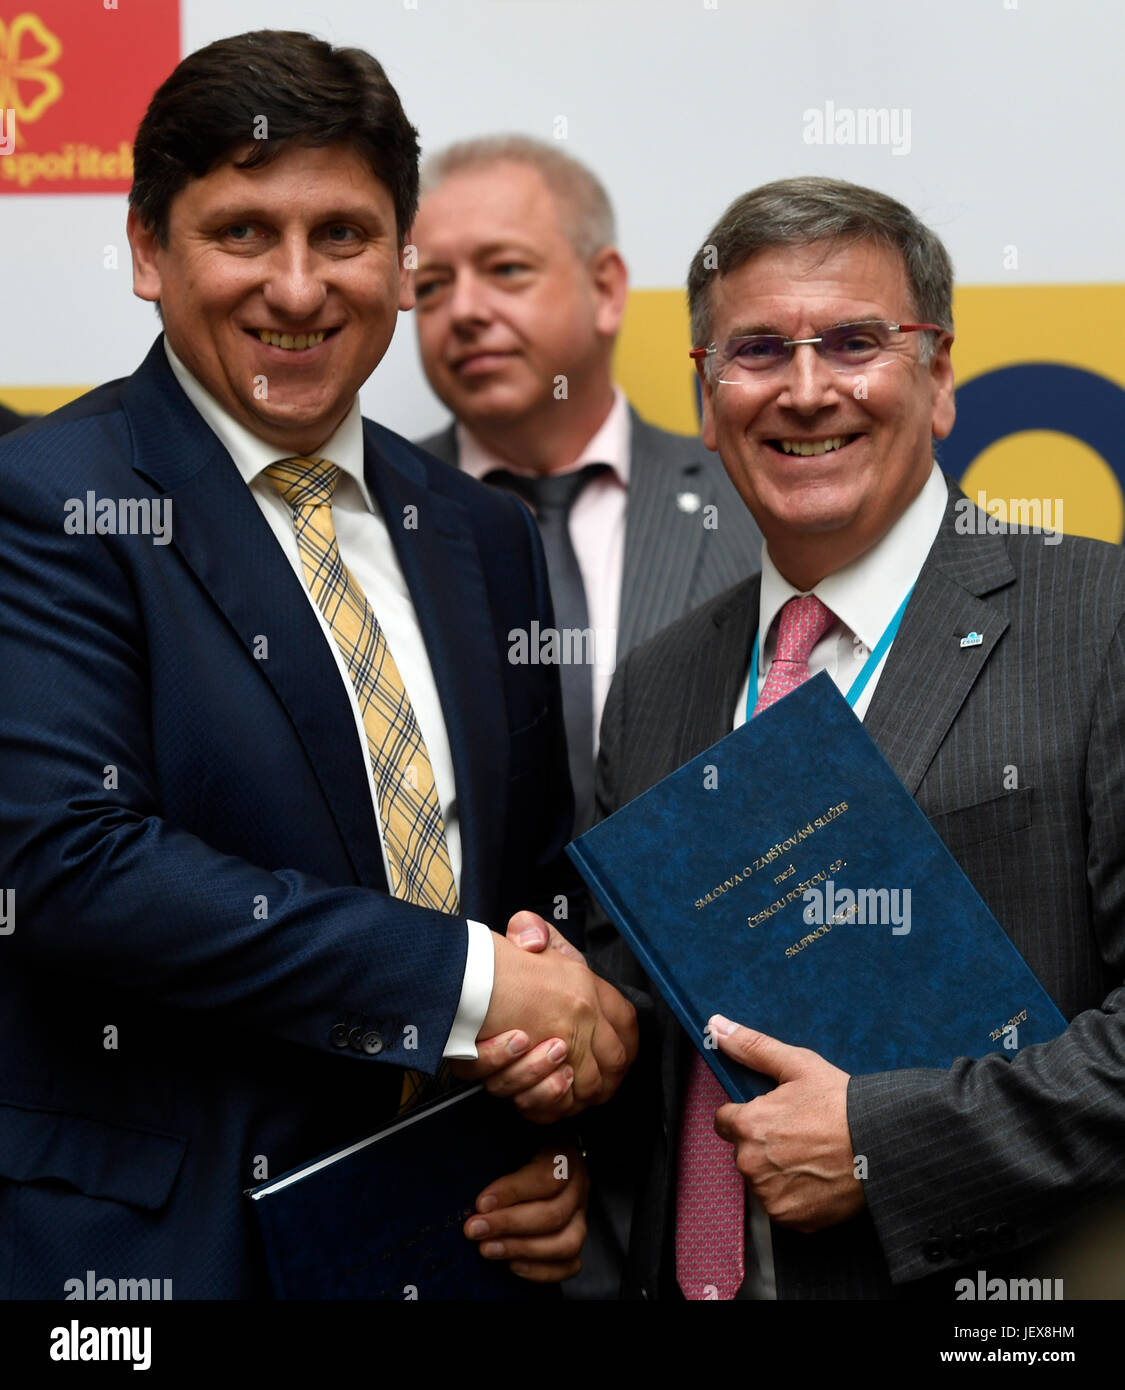 Prague, Czech Republic. 28th June, 2017. CEO of CSOB bank John Hollows (right), CEO of Czech Post Martin Elkan (left) and Interior Minister Milan Chovanec (back) attend the sign a contract on co-operation in banking and insurance services between Czech Post and CSOB in Prague, Czech Republic, on June 28, 2017. Credit: Michal Krumphanzl/CTK Photo/Alamy Live News Stock Photo